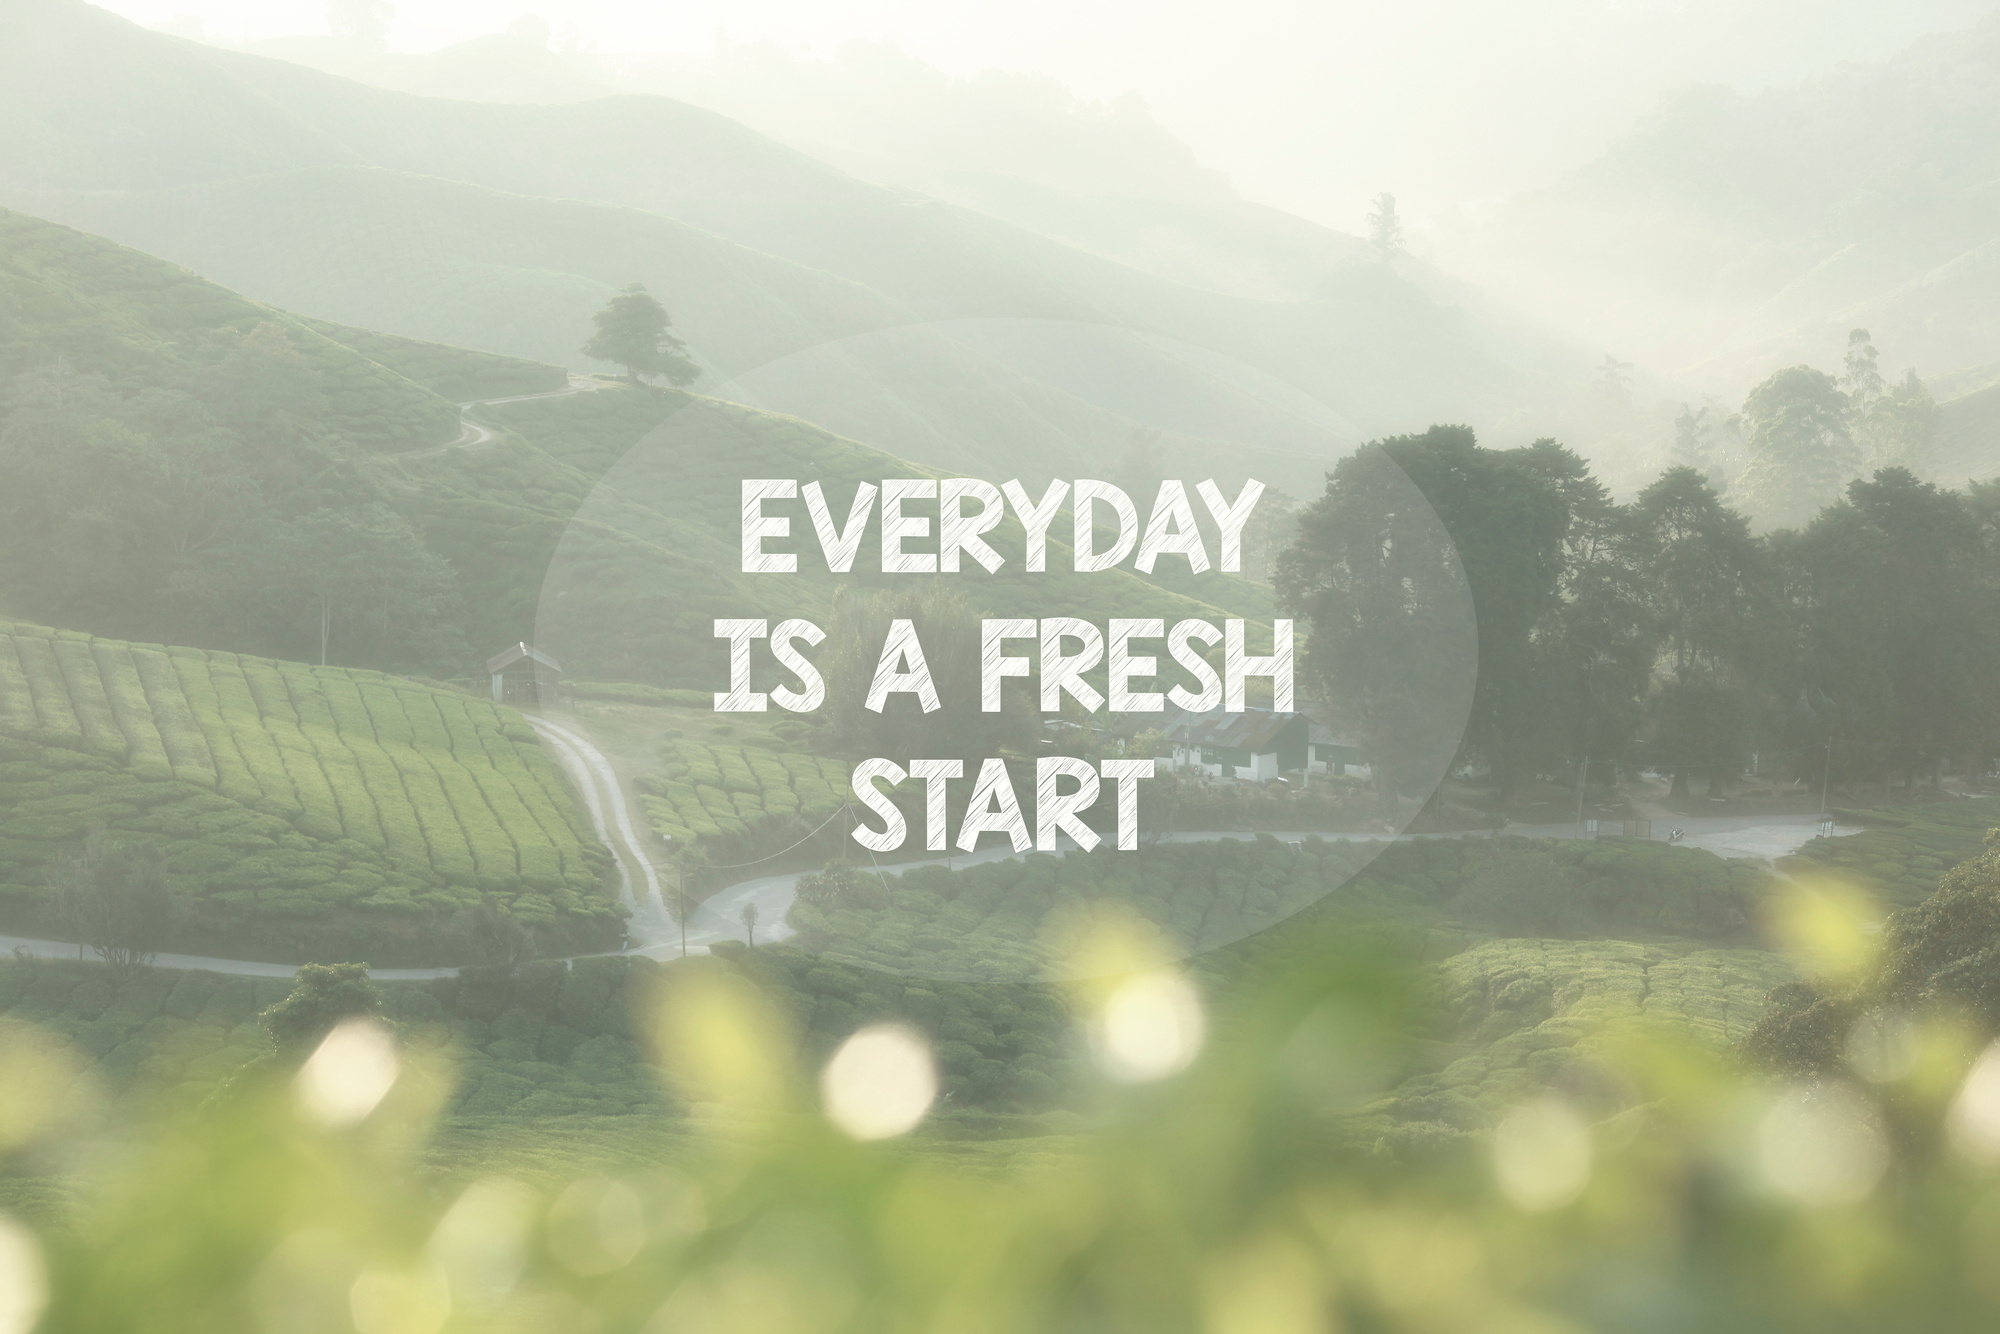 Life Inspirational Quotes - Everyday is a fresh start.